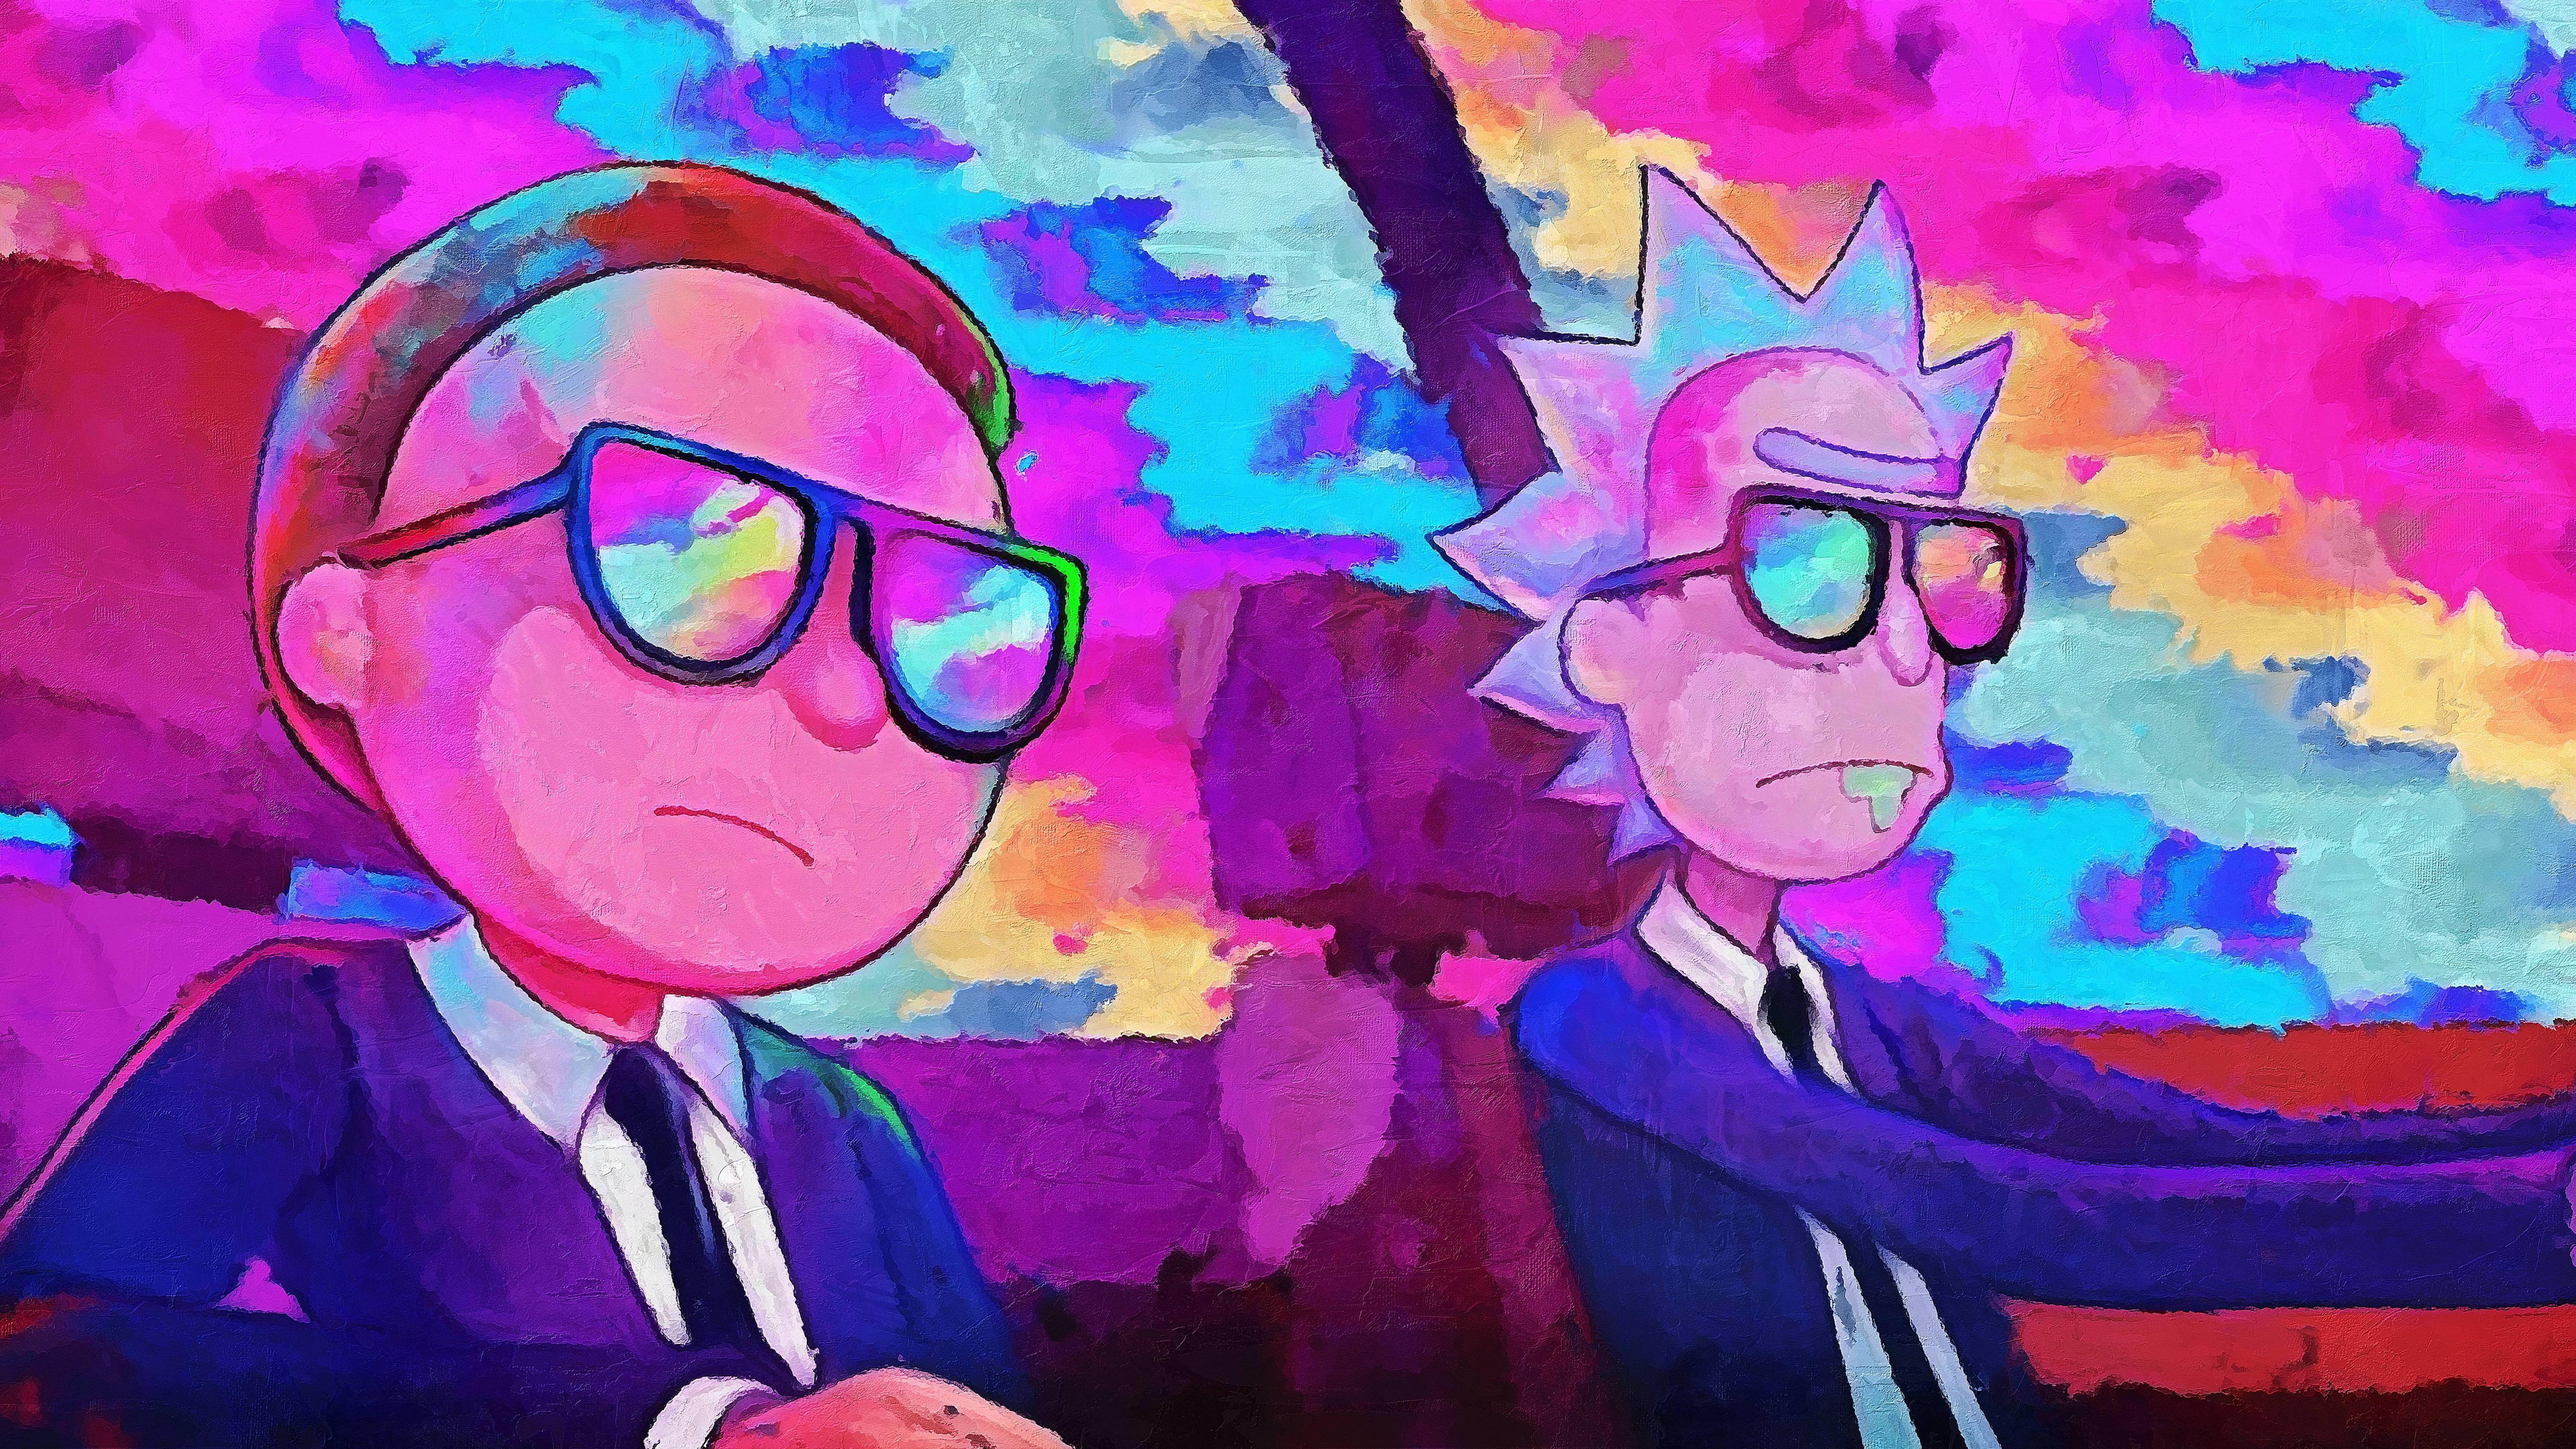 Rick and Morty illustration, Rick and Morty, cartoon, psychedelic